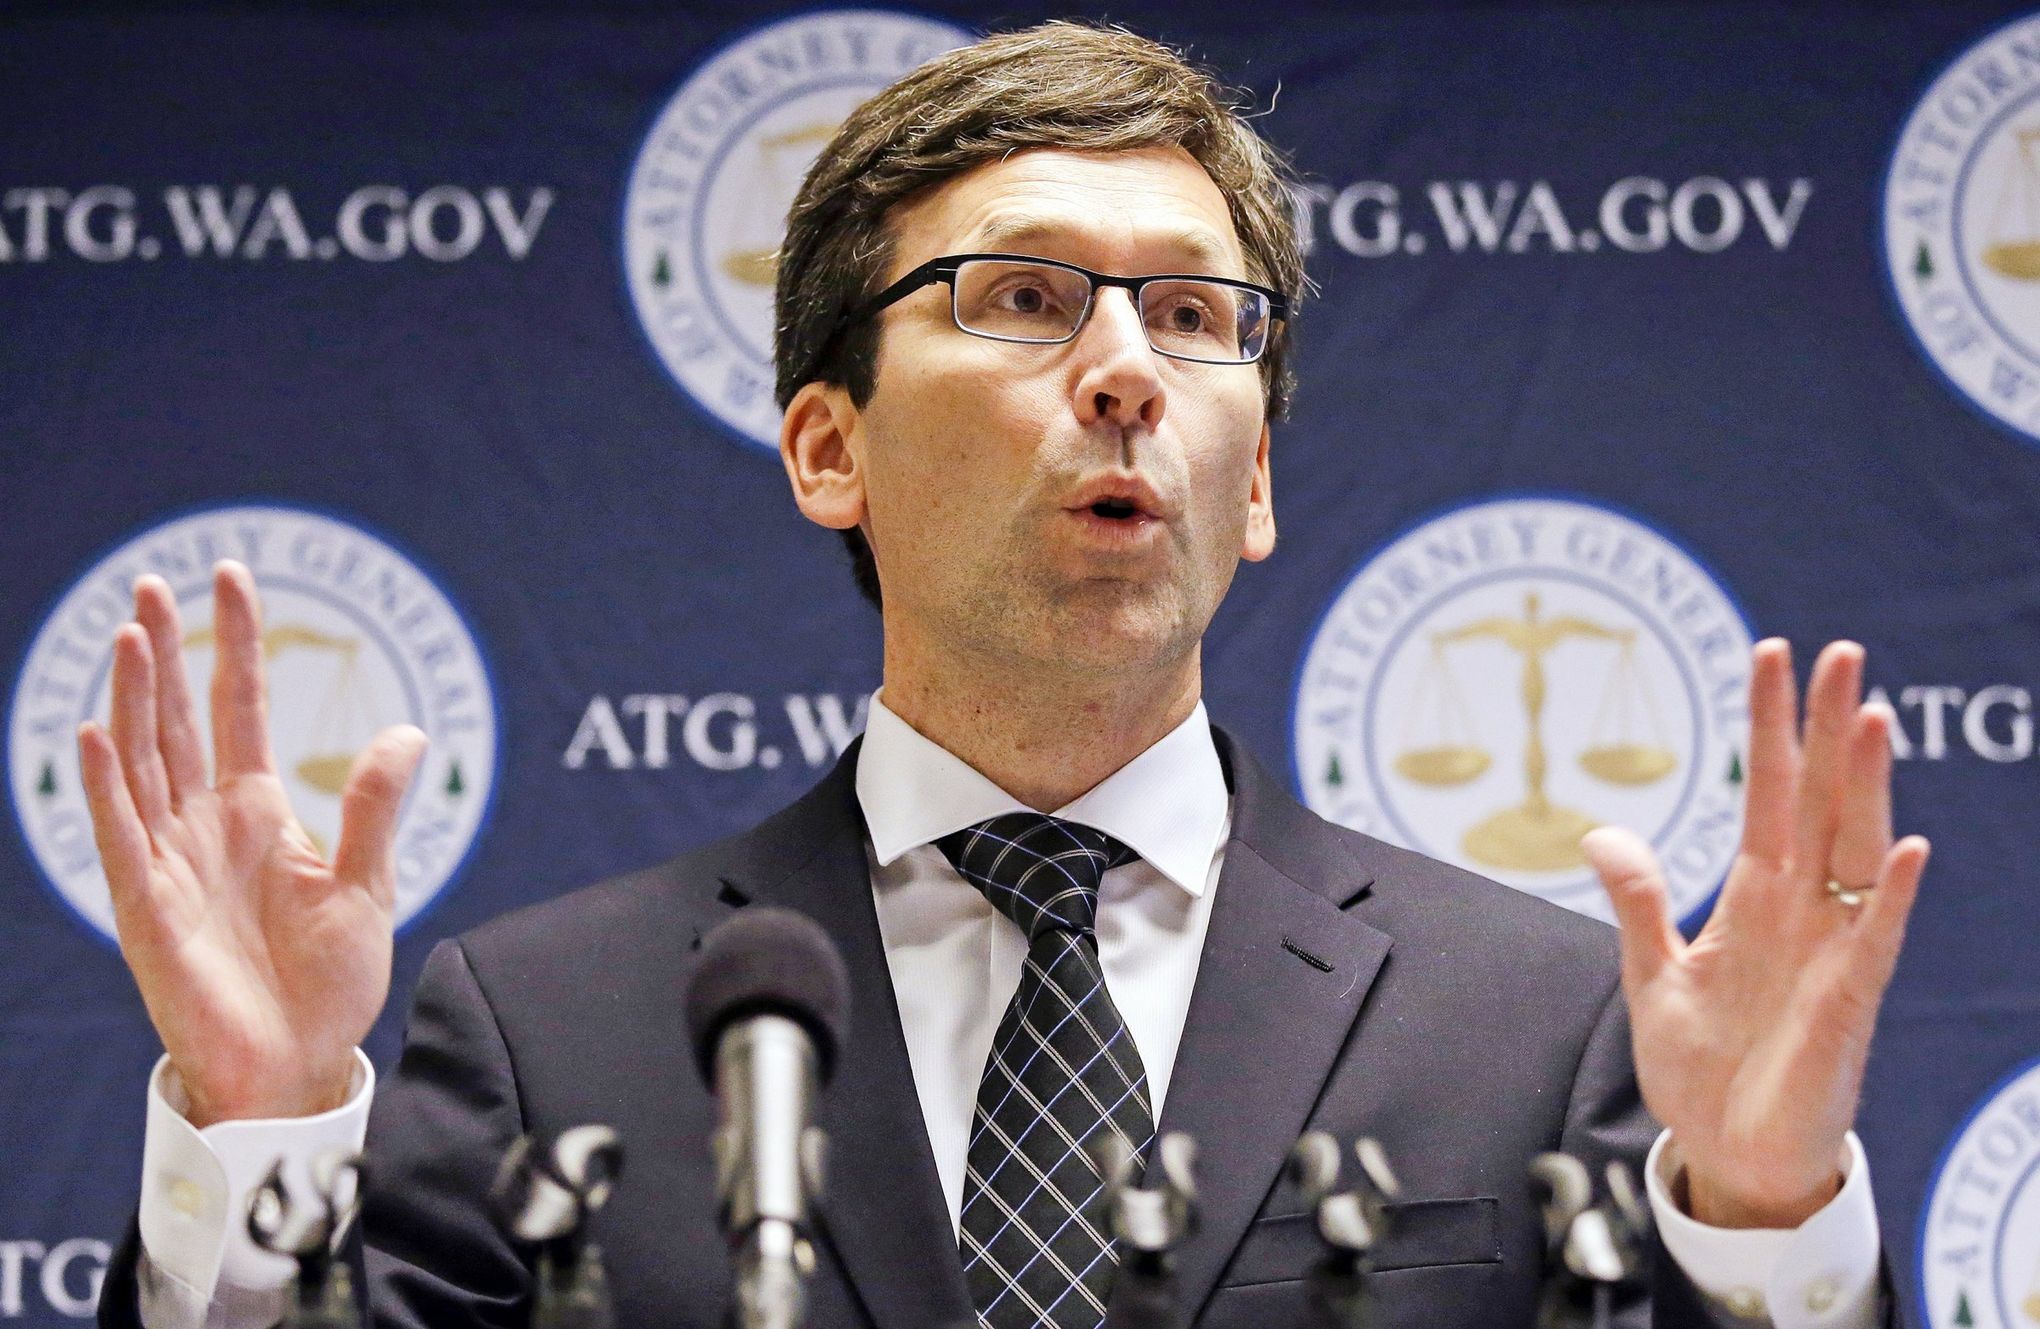 Attorney General Bob Ferguson speaks at a press conference